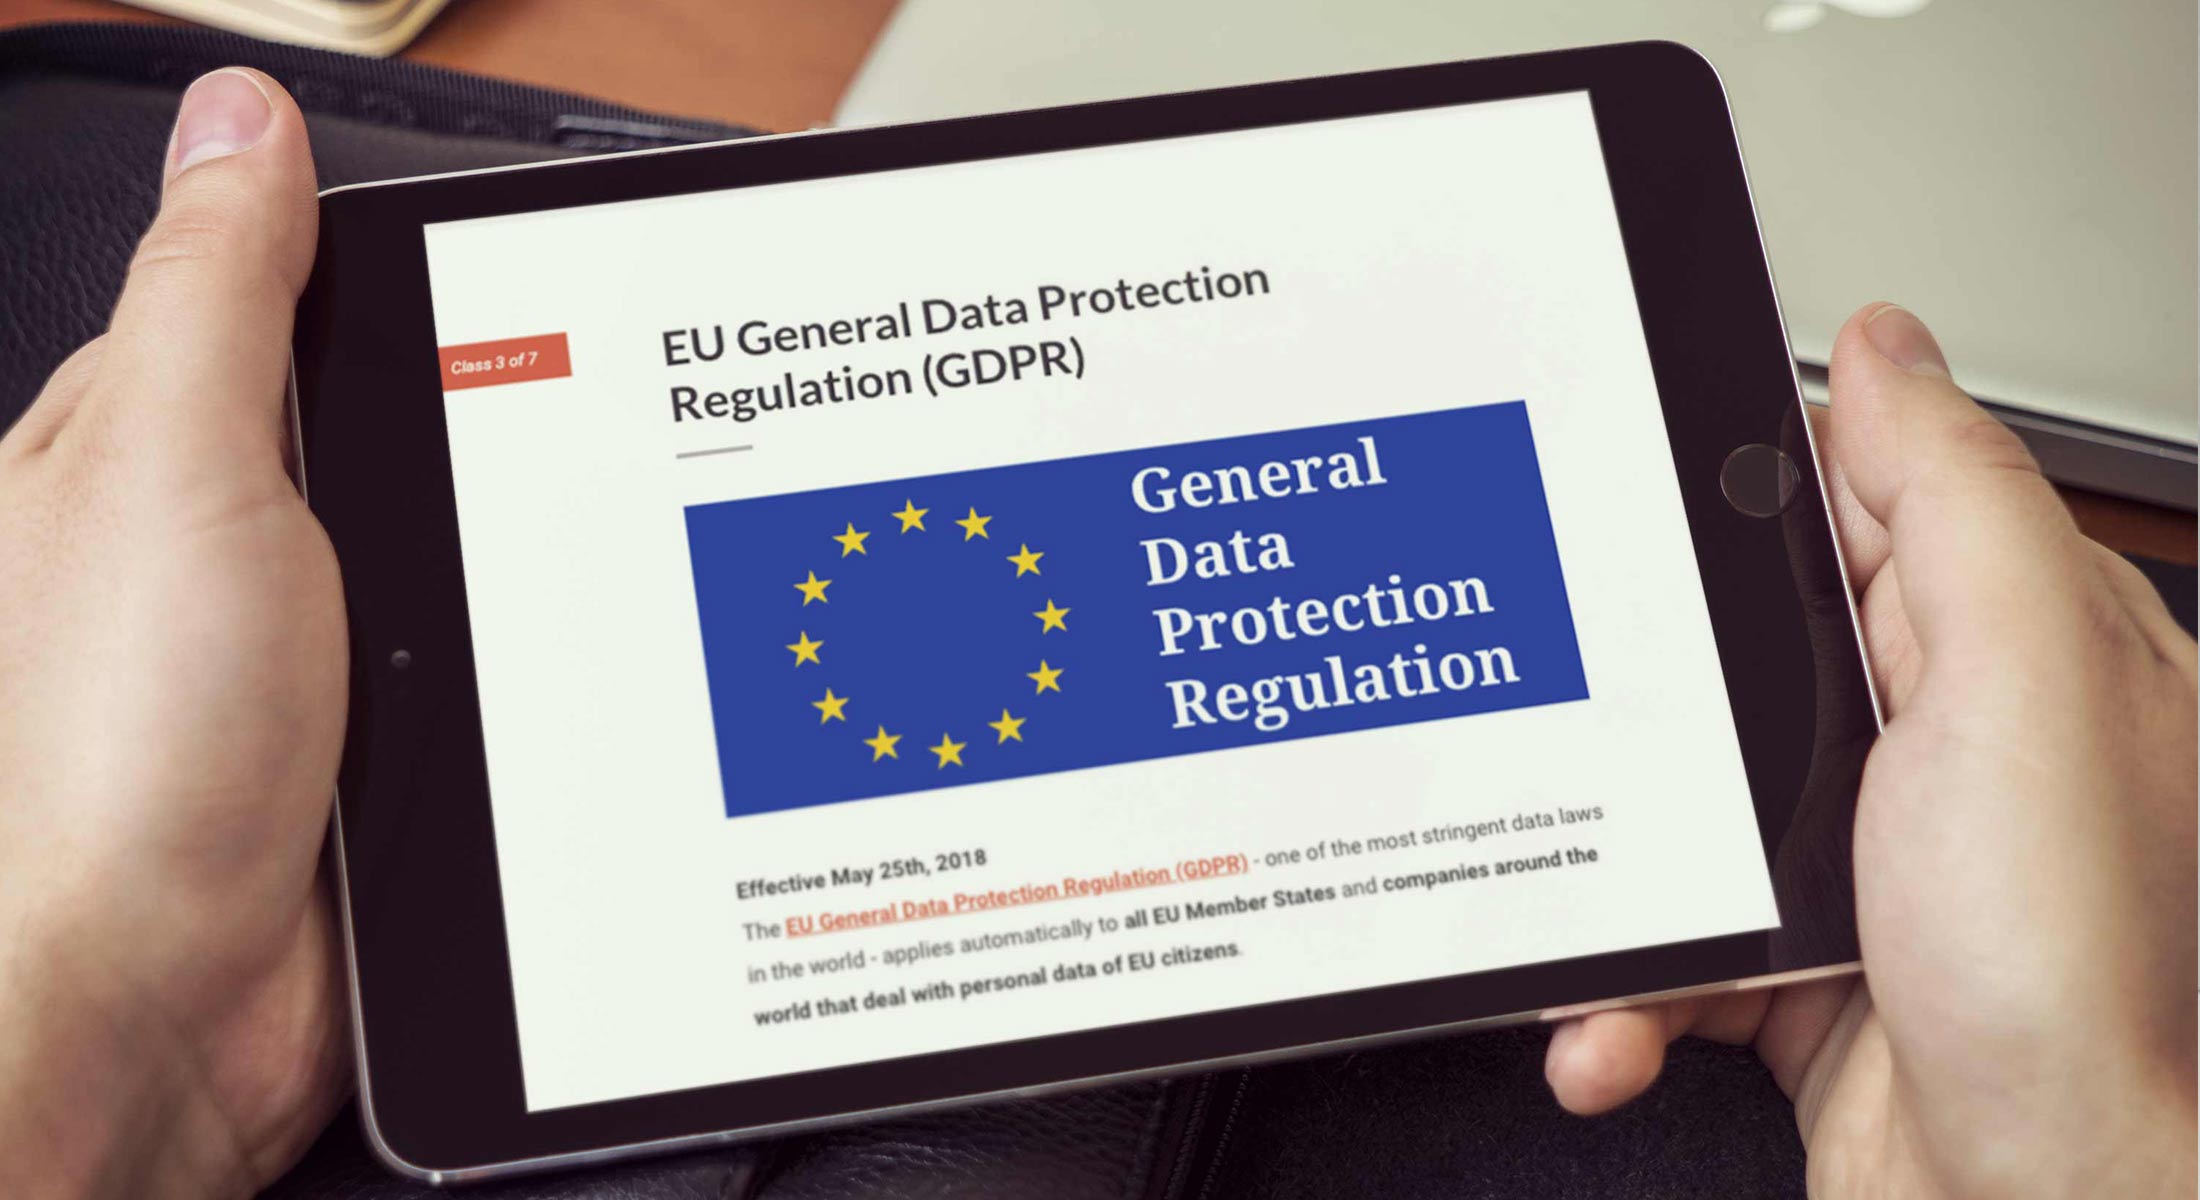 Hands holding tablet with a responsive elearning course page about the General Data Protection Regulation